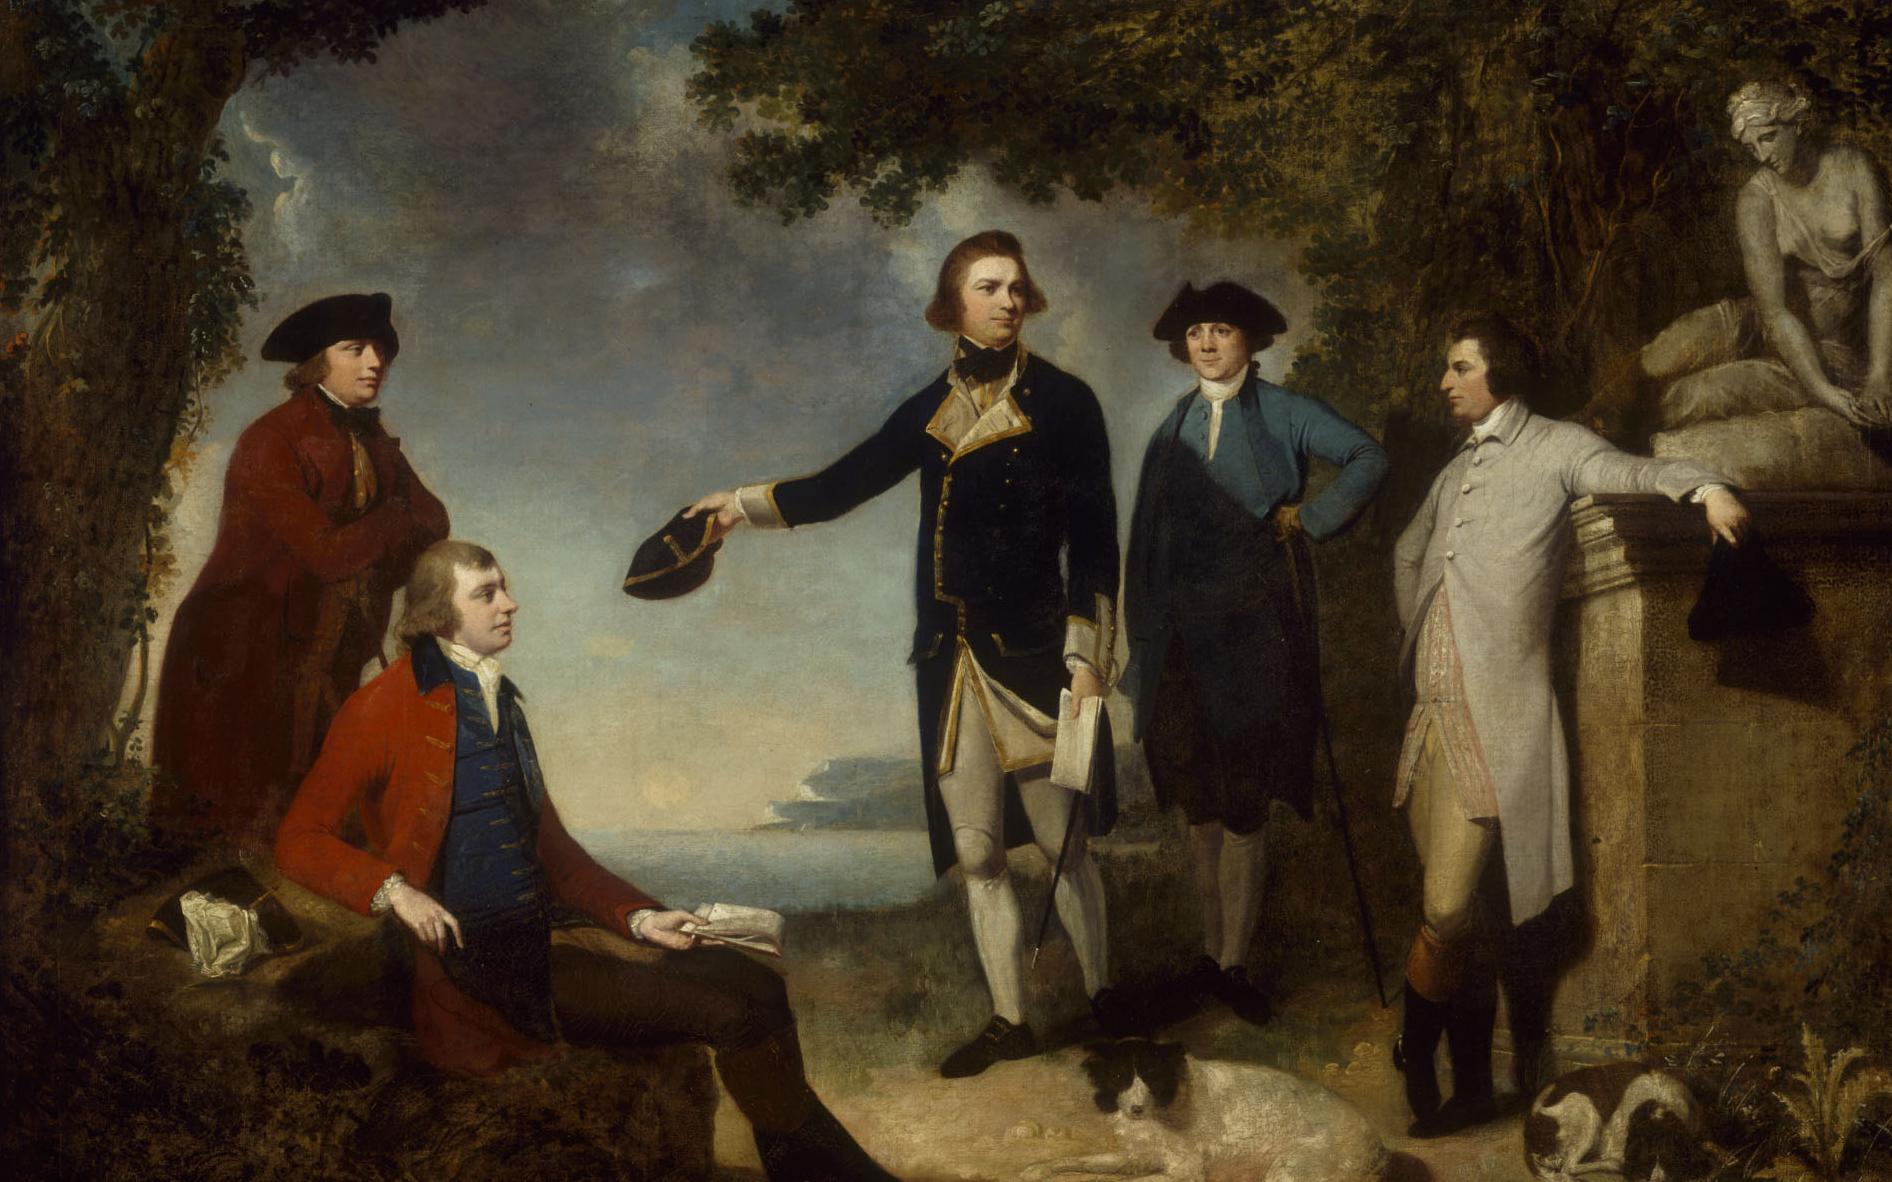 Painting by John Hamilton Mortimer showing from left: Dr Daniel Solander, Sir Joseph Banks, Captain James Cook, Dr John Hawkesworth and Lord Sandwich.